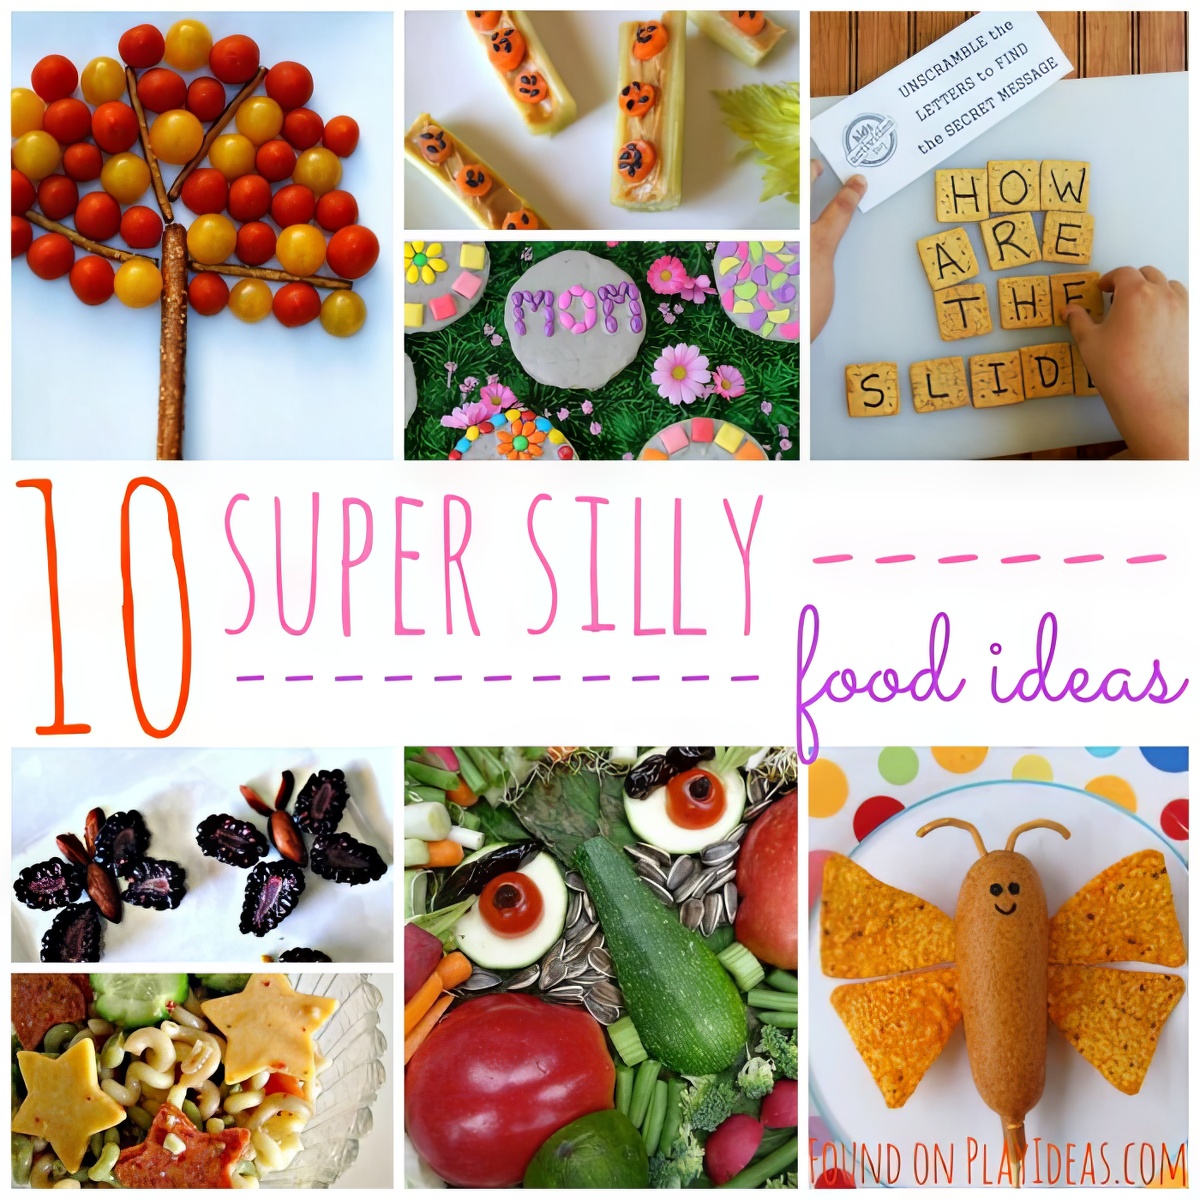 Enjoy creating this super silly food Ideas with your kids!